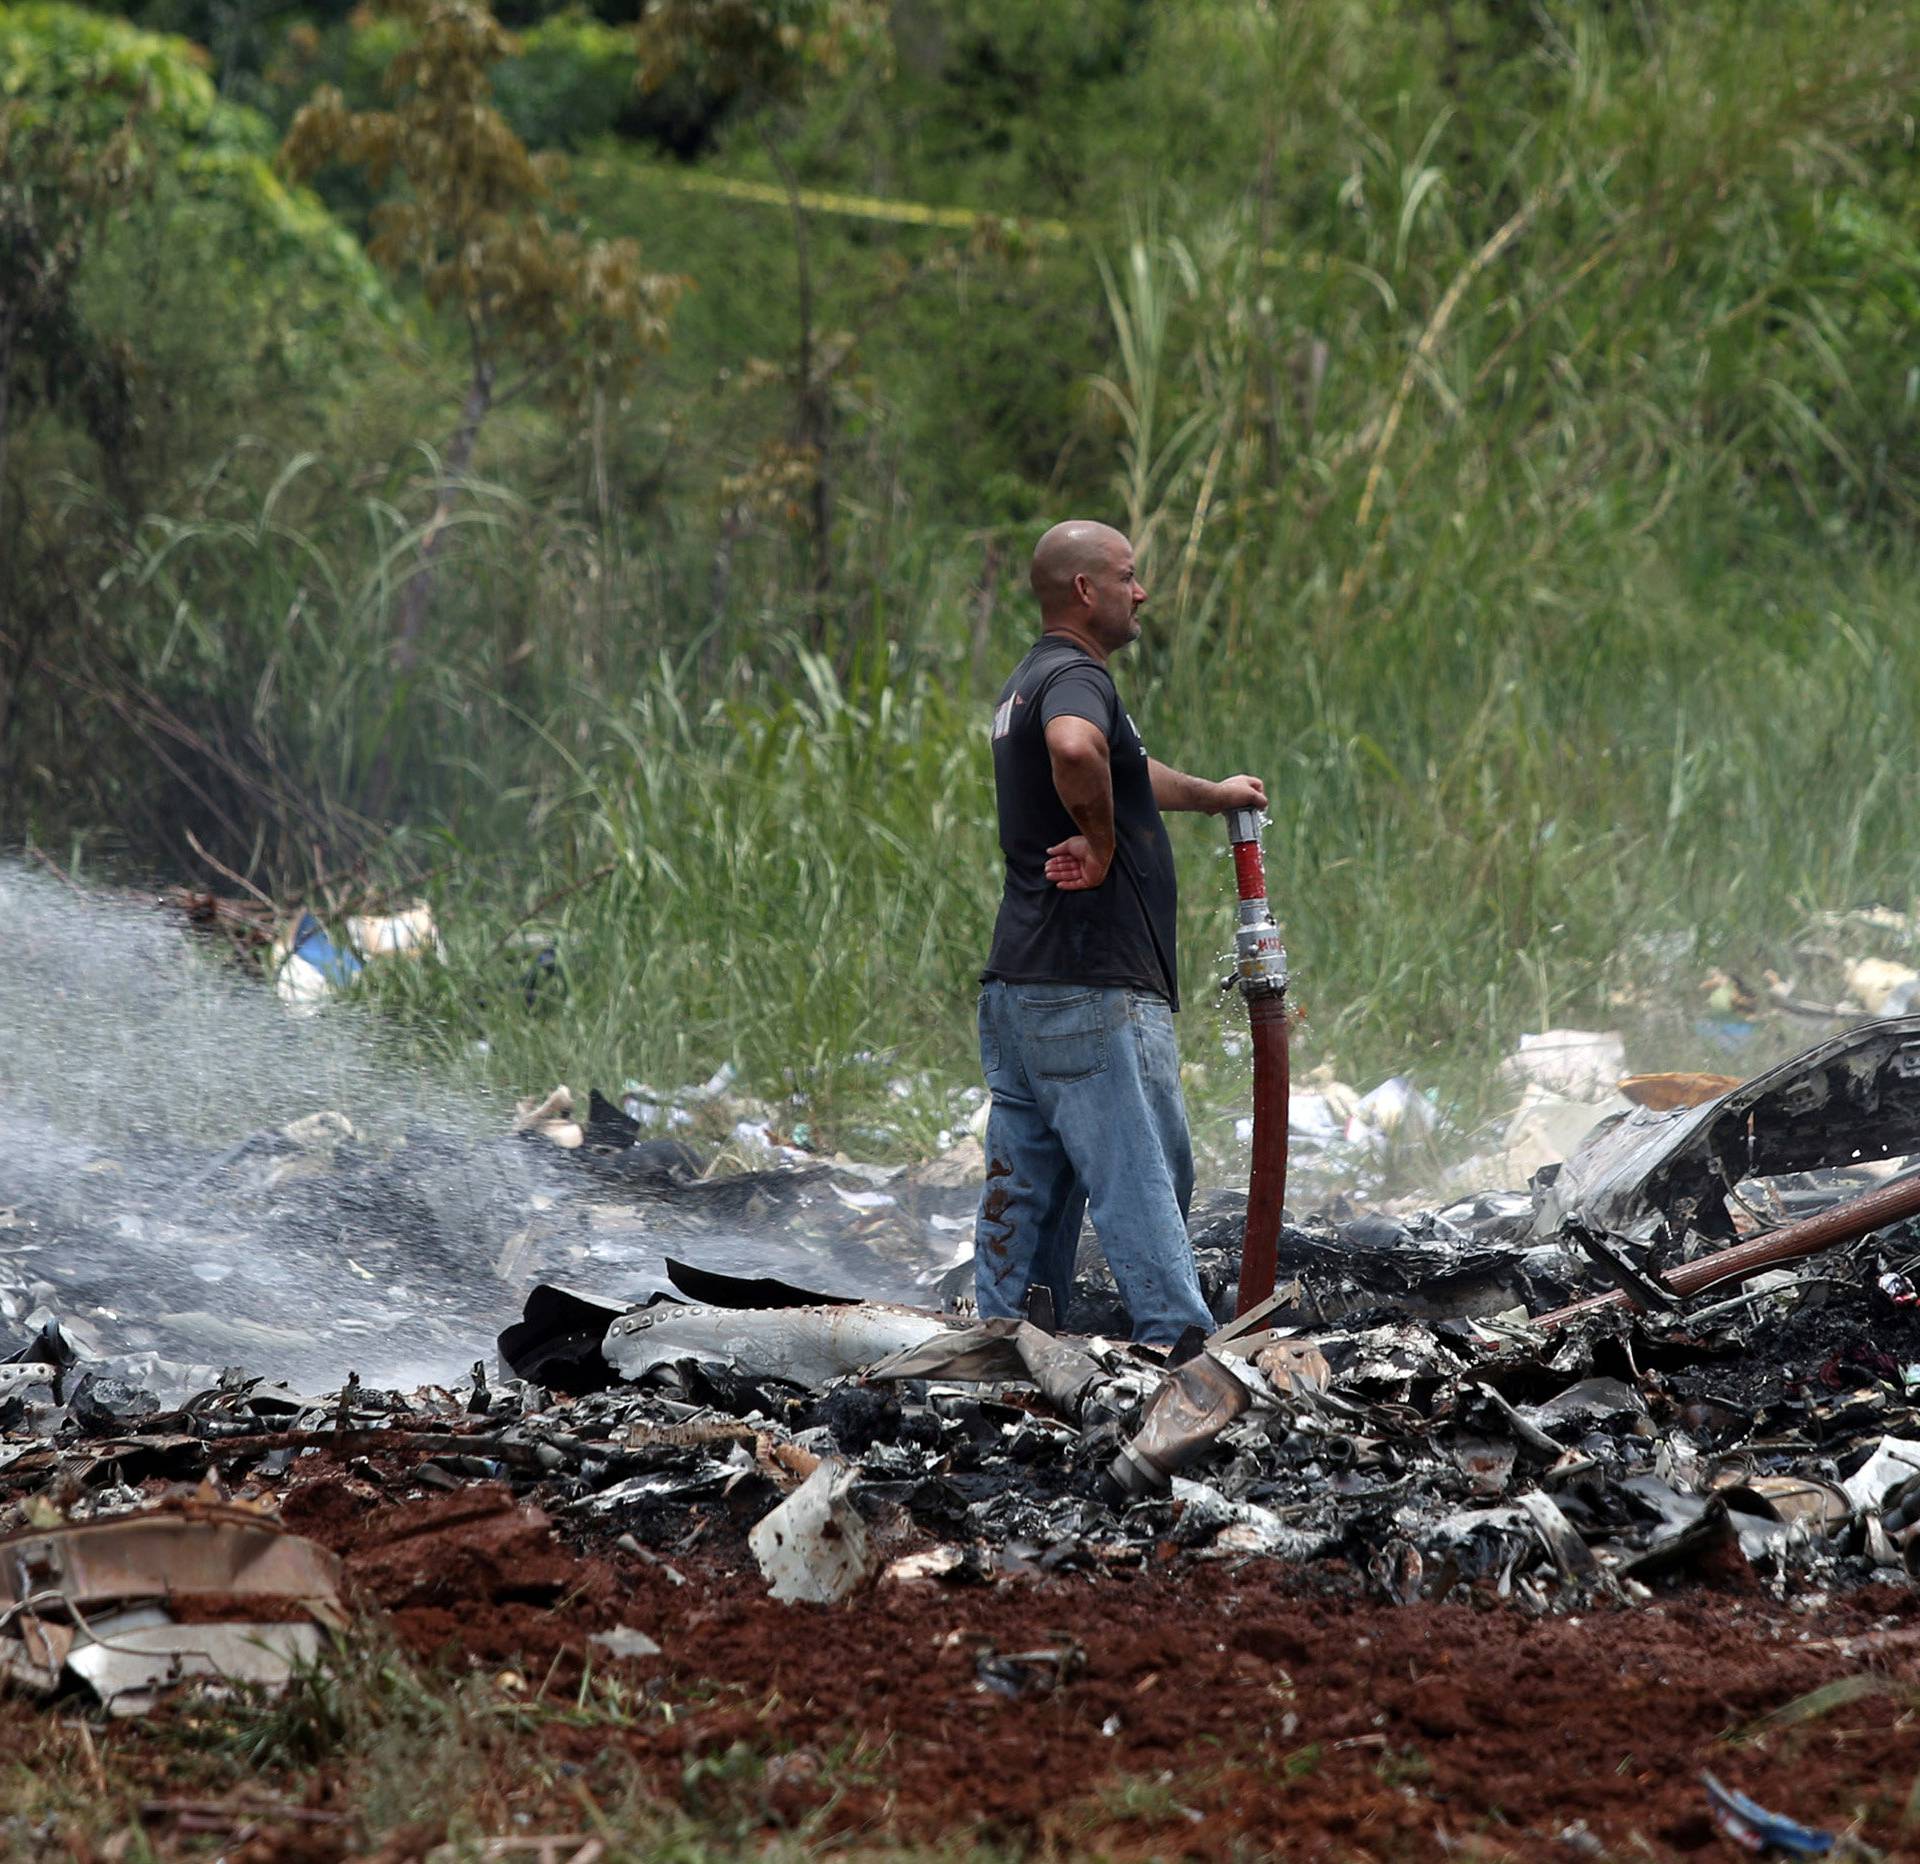 A rescue team member looks on while working in the wreckage of a Boeing 737 plane that crashed in the agricultural area of Boyeros